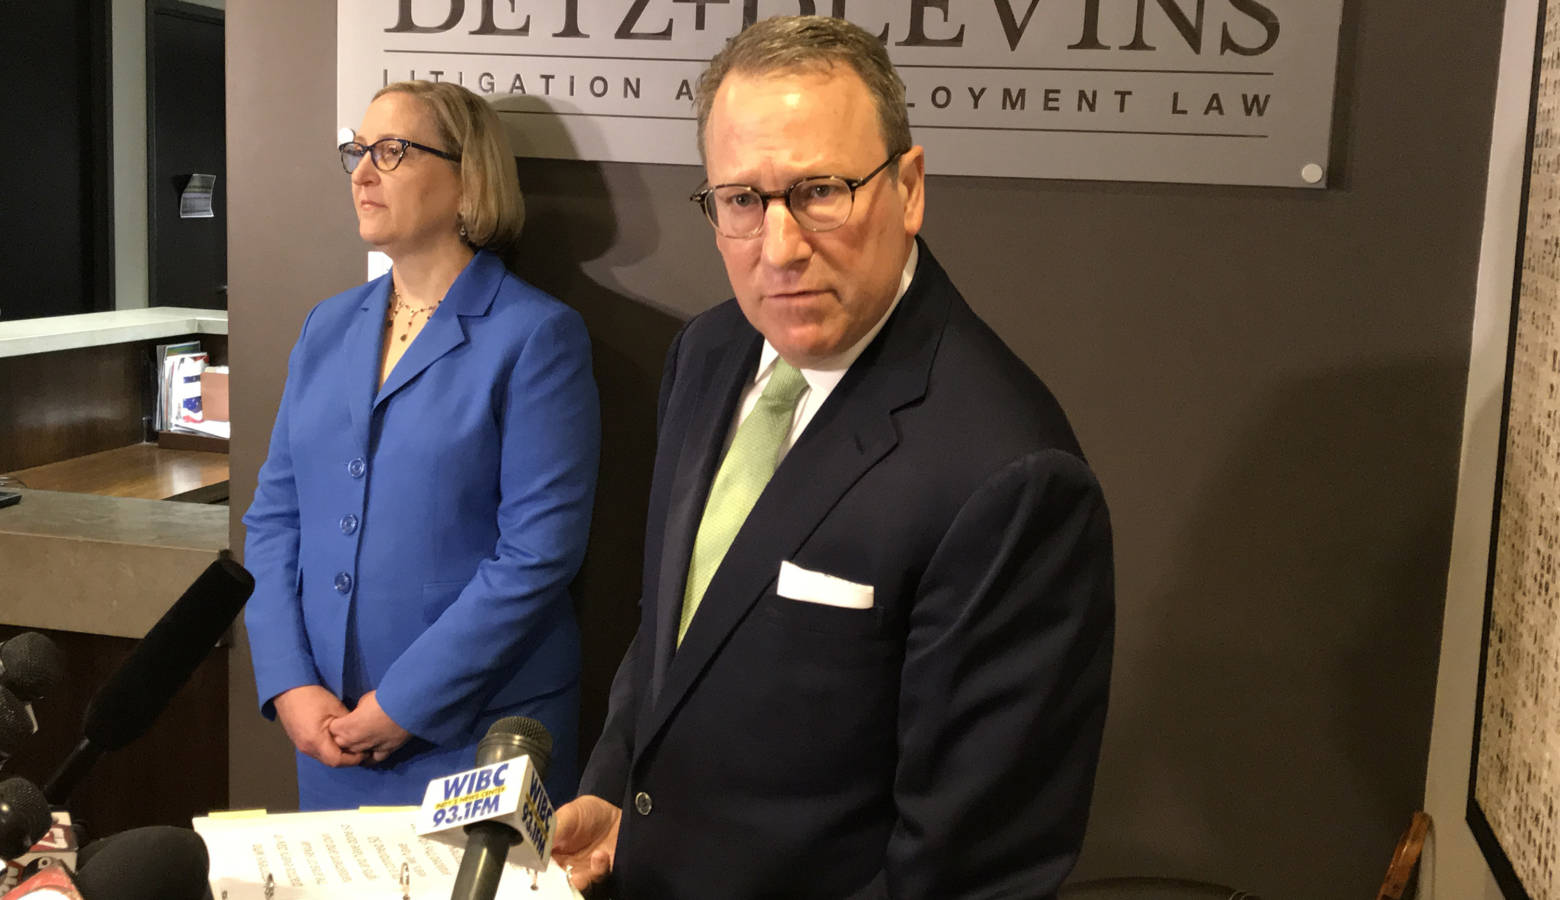 Attorneys Kevin Betz, right, and Sandra Blevins, left, sought to discredit parts of a leaked report that contains sexual misconduct allegations against Attorney General Curtis Hill. (Brandon Smith/IPB News)